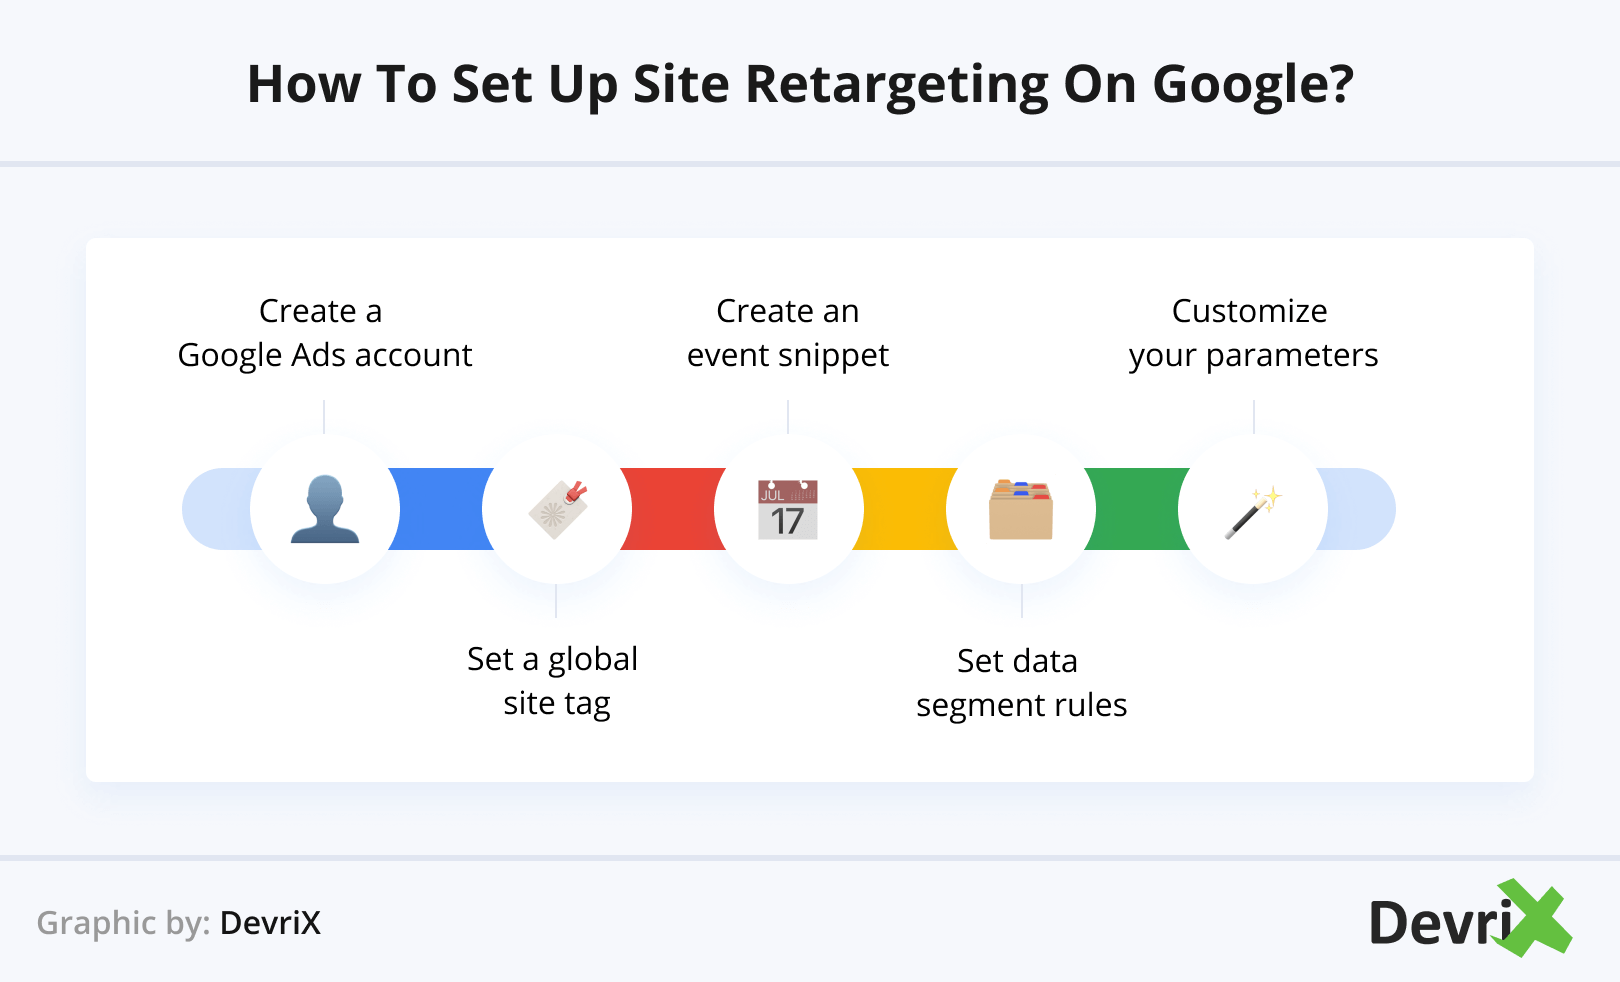 How to Set Up Site Retargeting on Google